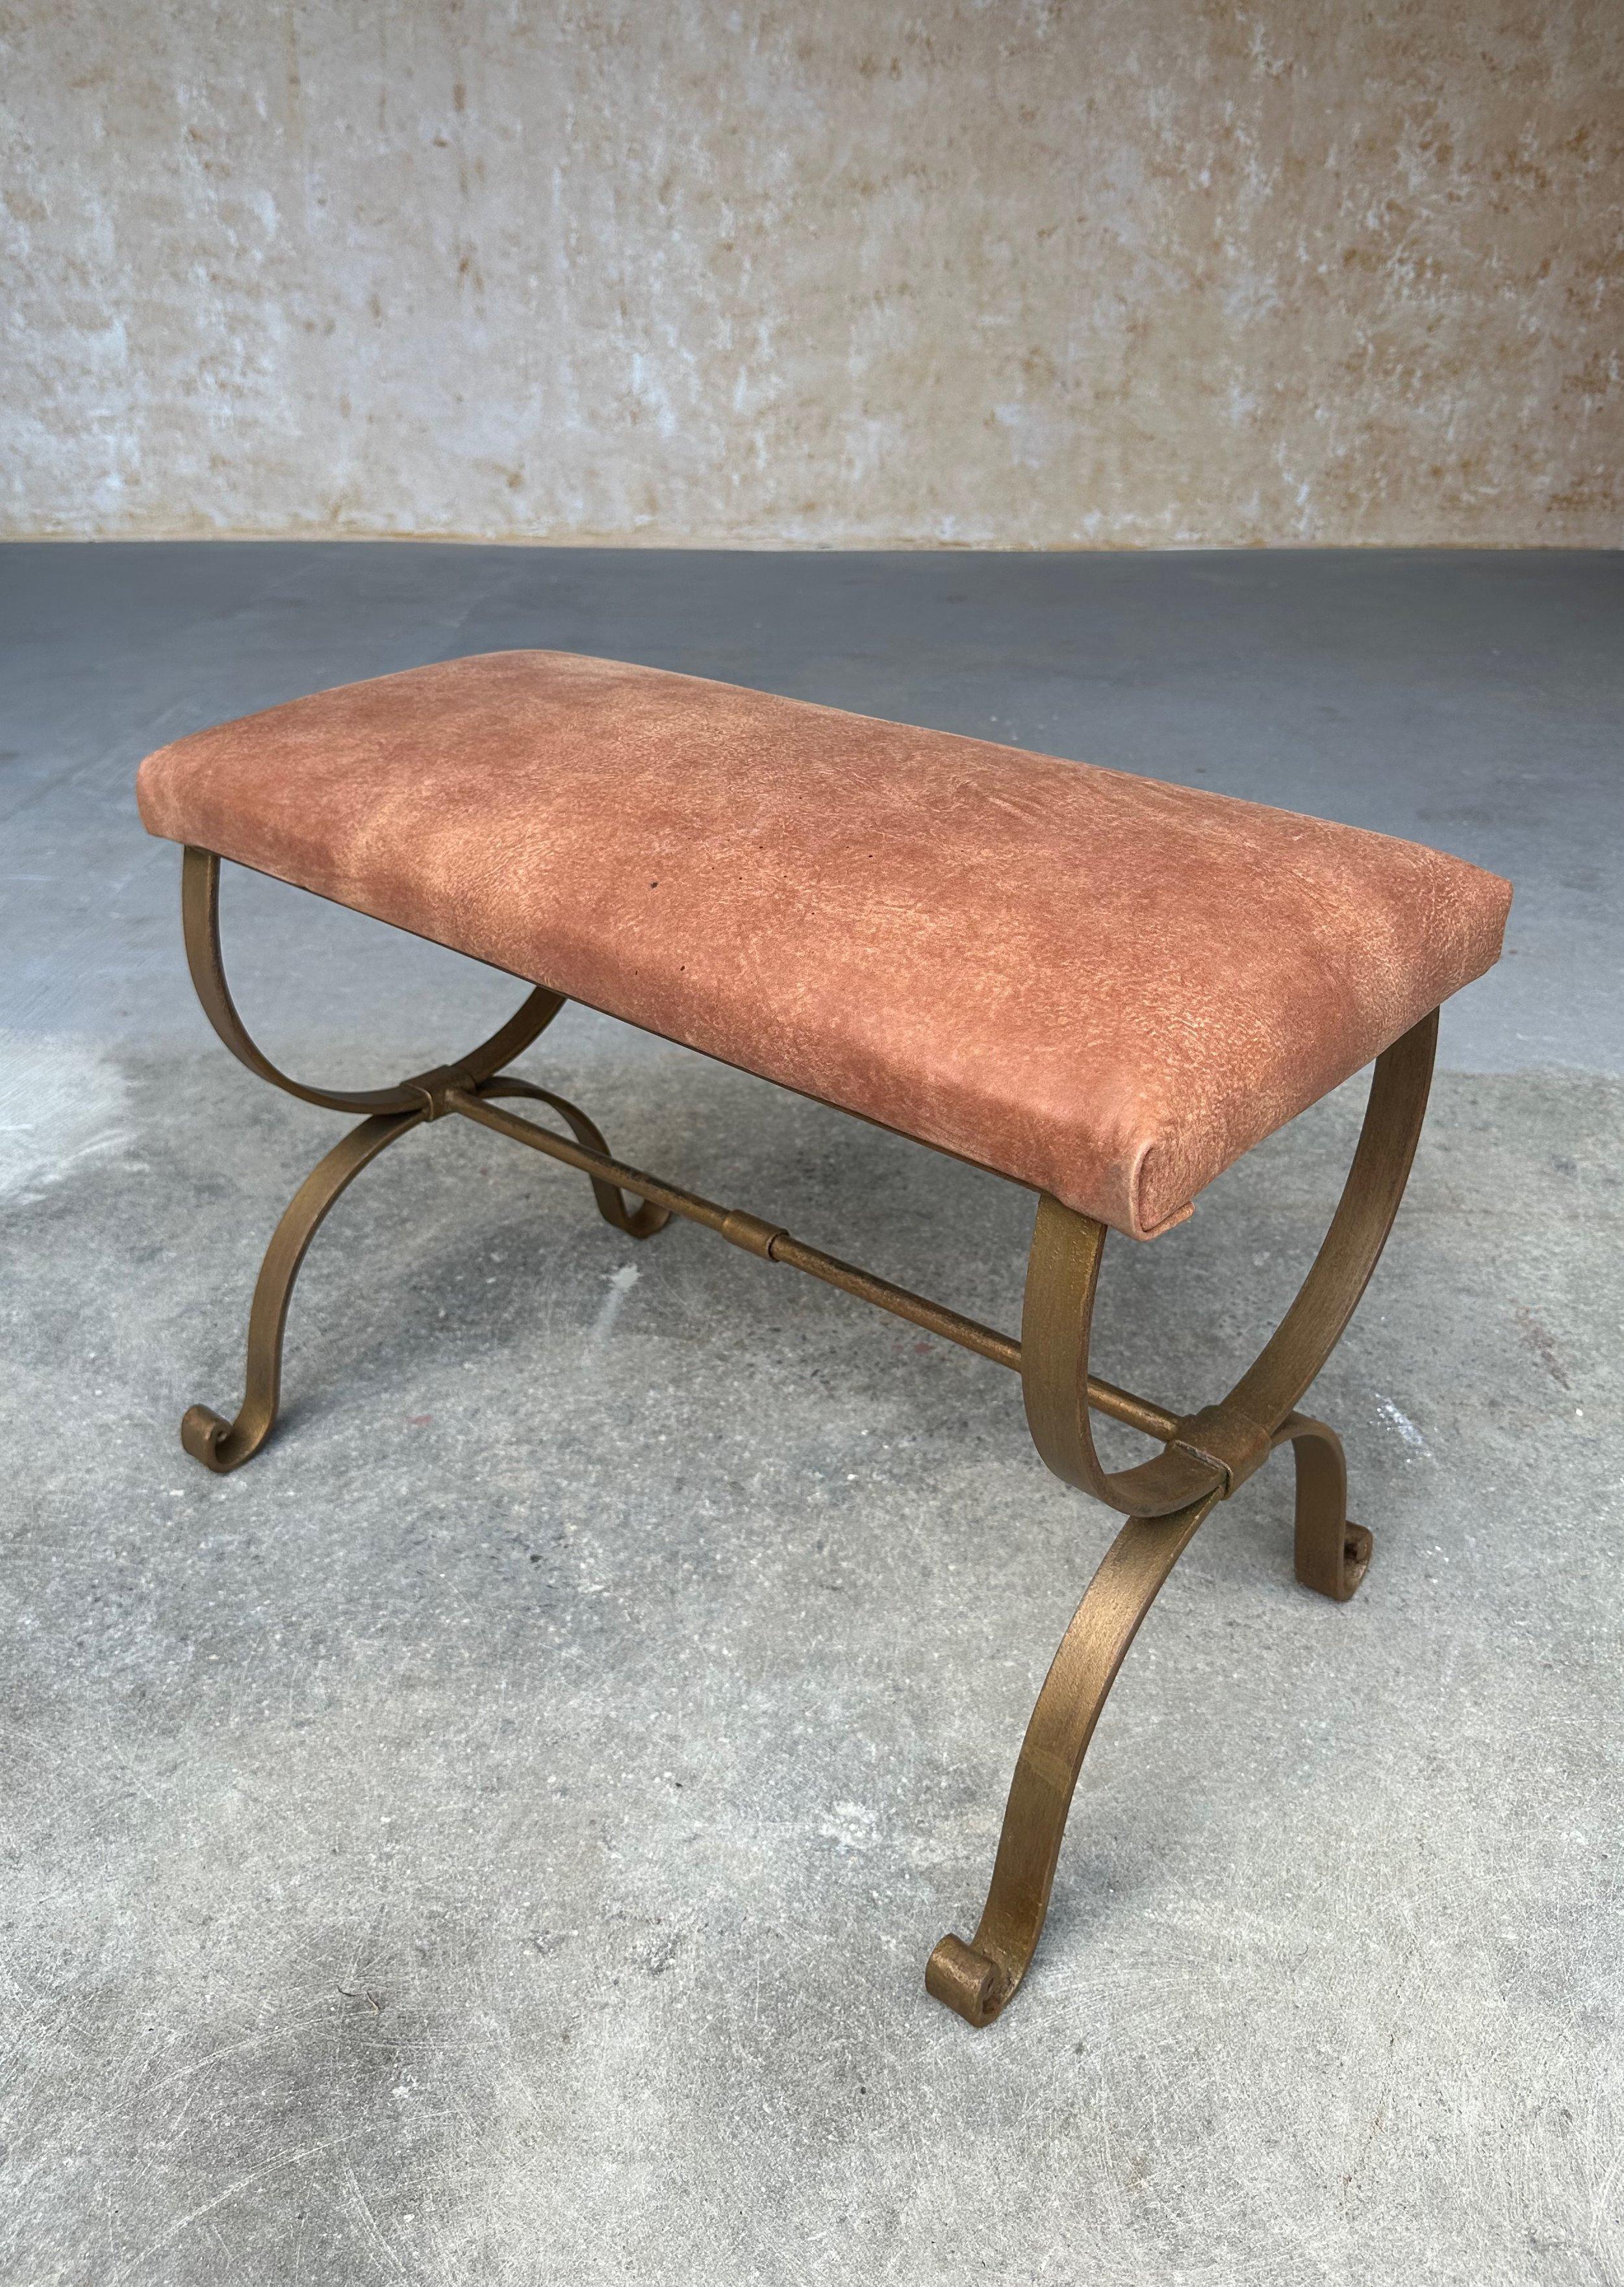 This elegant gilt iron bench was recently crafted by skilled artisans and features scrolled legs and a stretcher with a decorative center band. Handmade by expert European craftsmen, it has a hand forged iron base with a hand applied gold paint